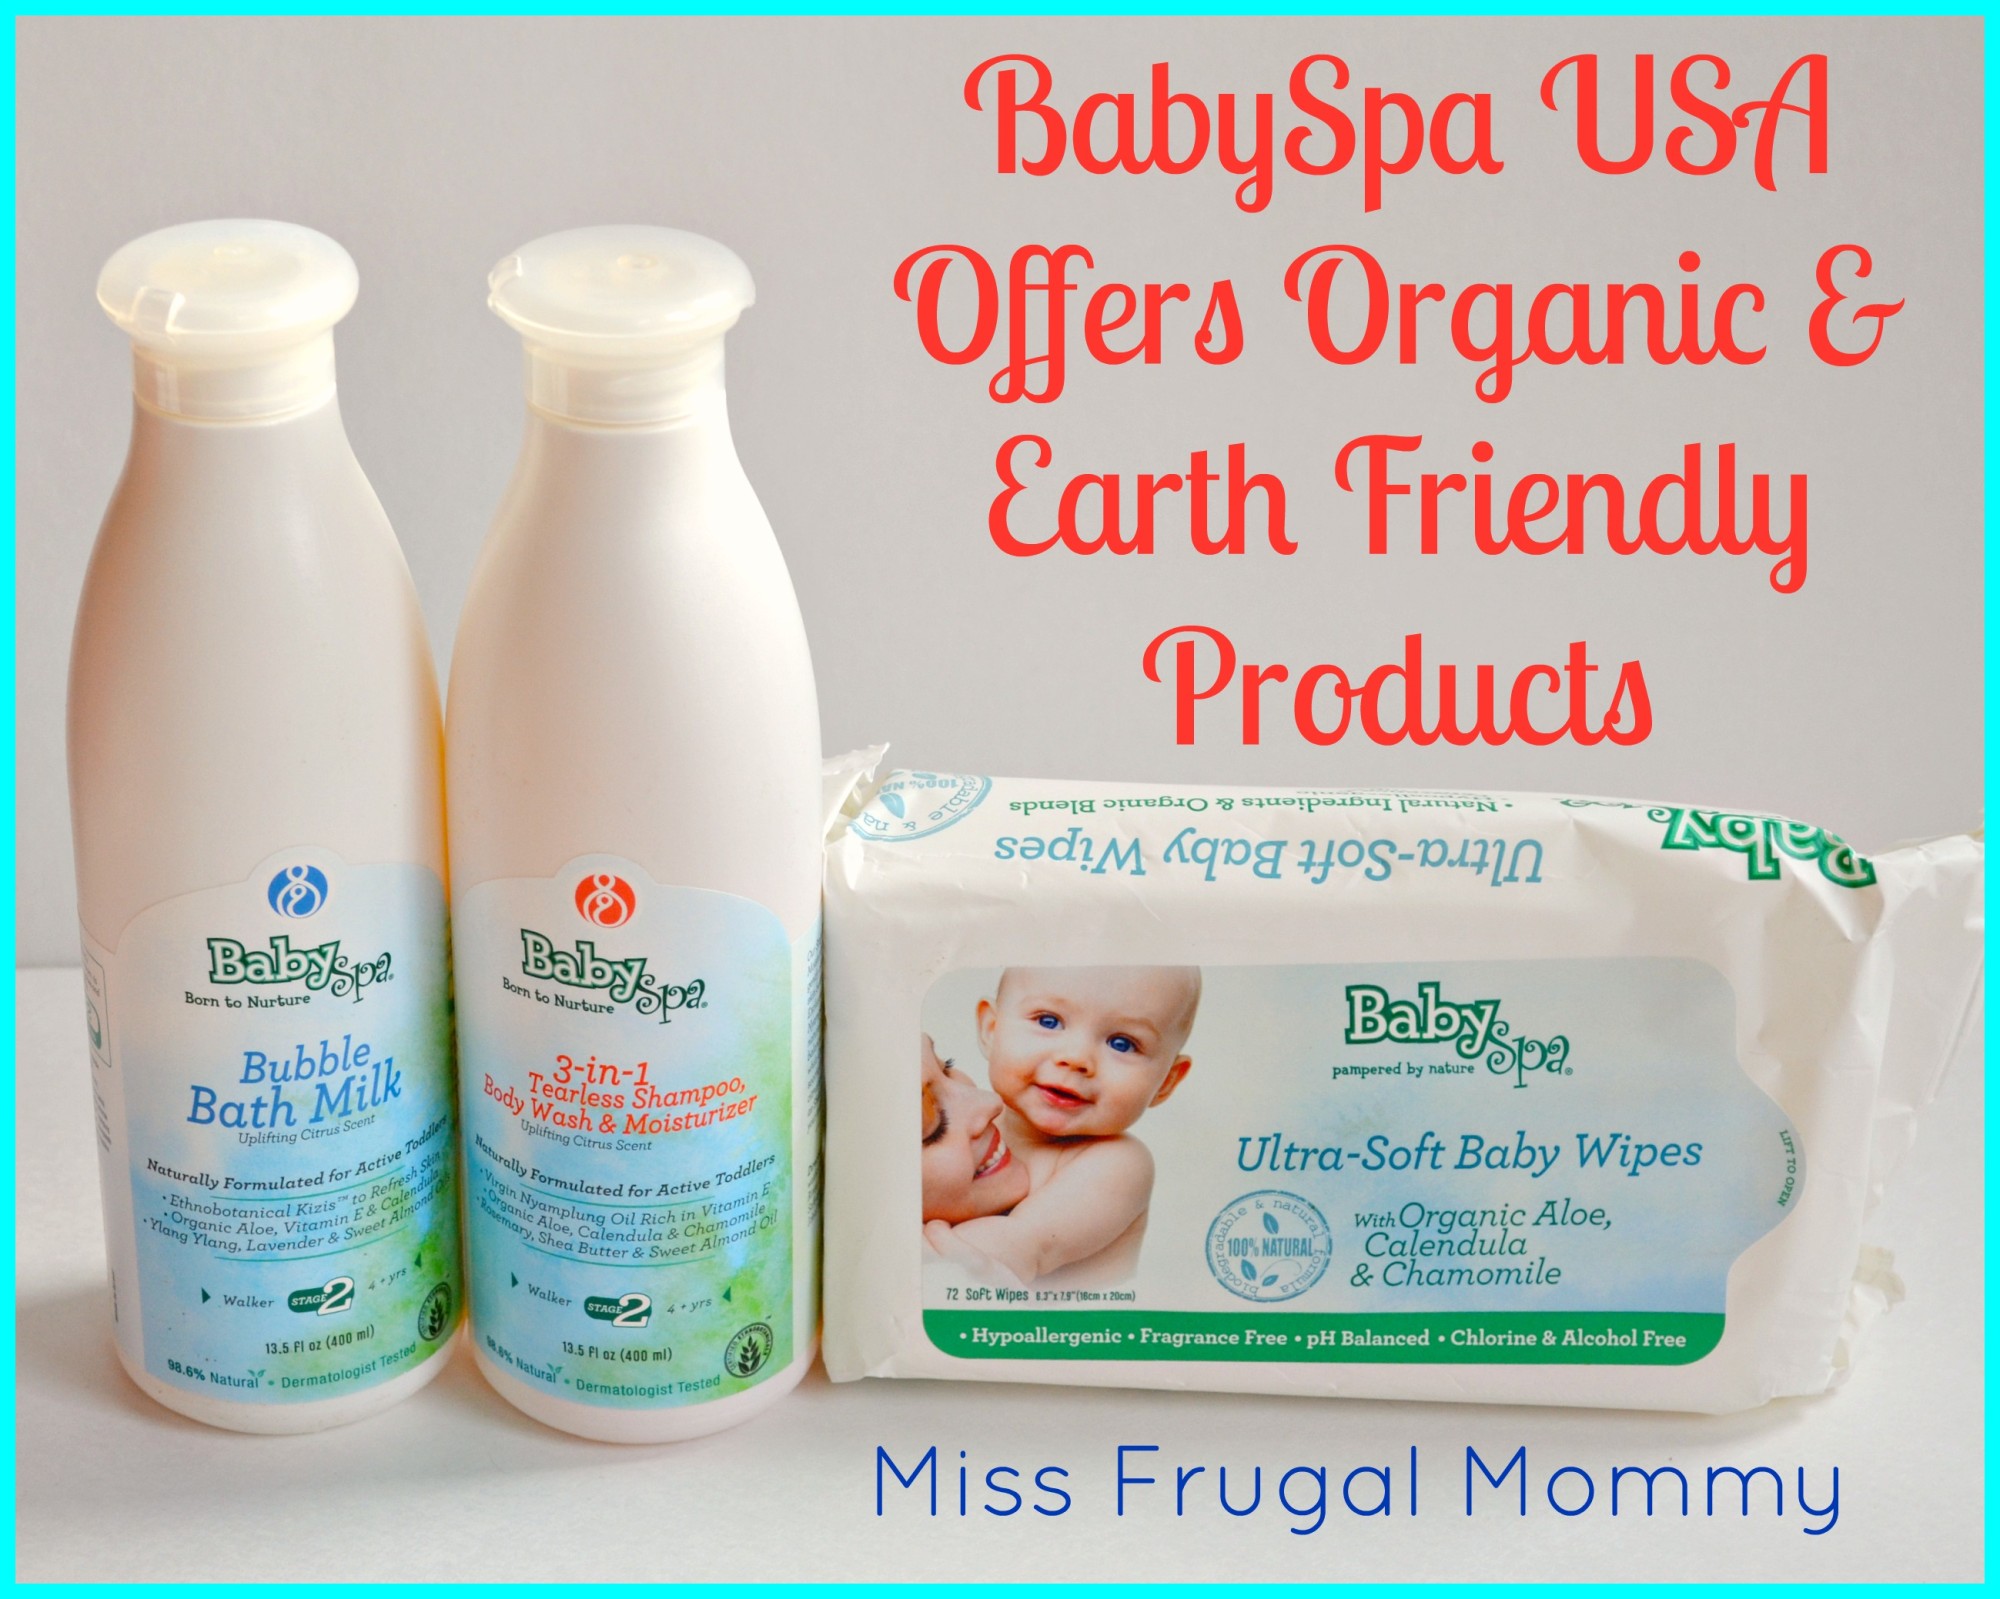 BabySpa USA Offers Organic & Earth Friendly Products